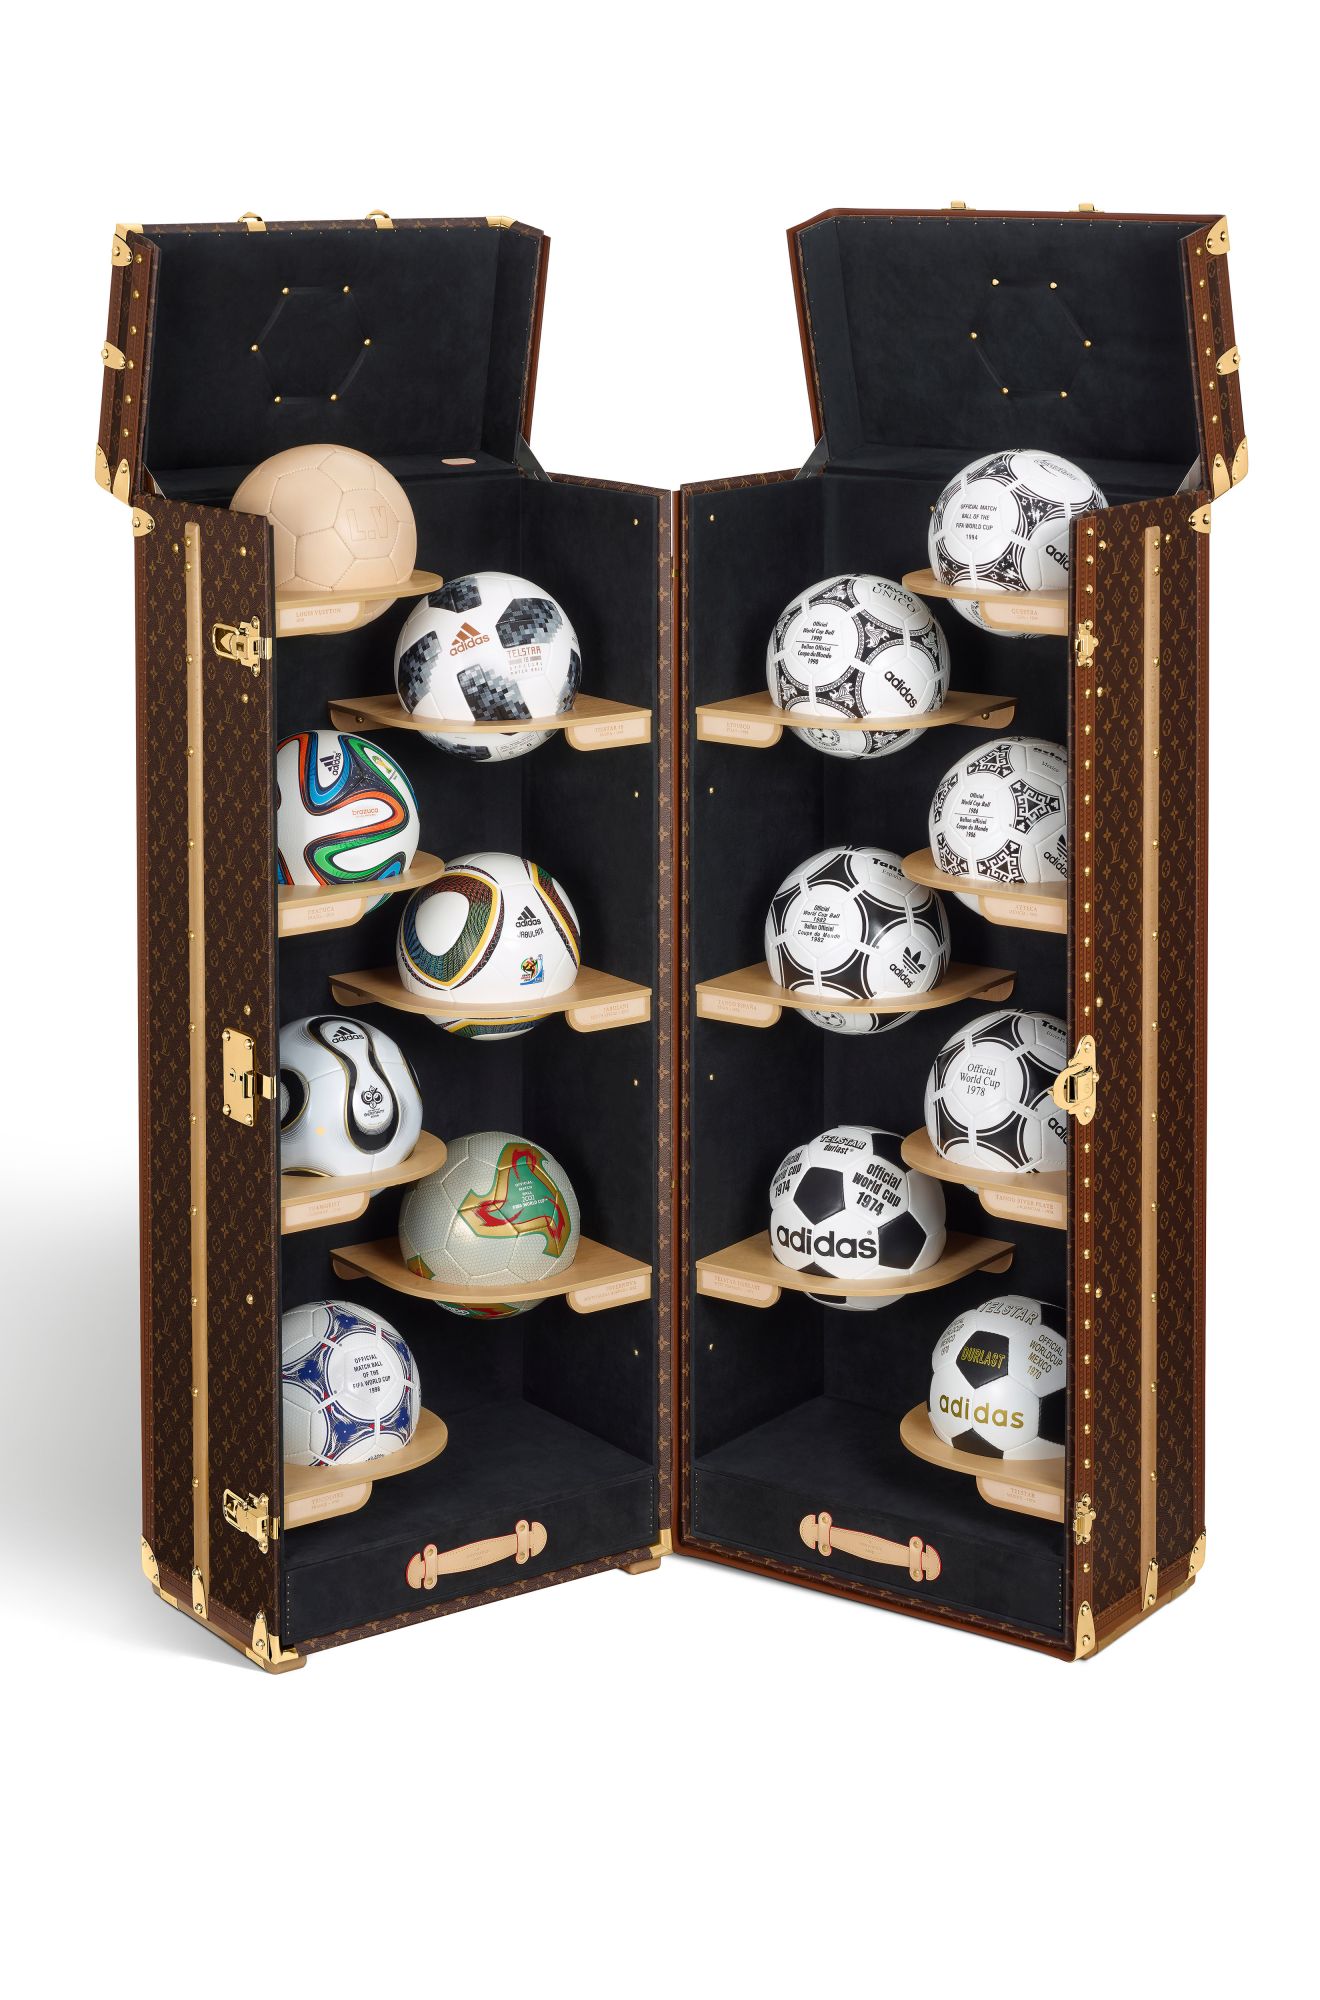 LOUIS VUITTON 2018 WORLD CUP RUSSIA COLLECTION LAUNCH —